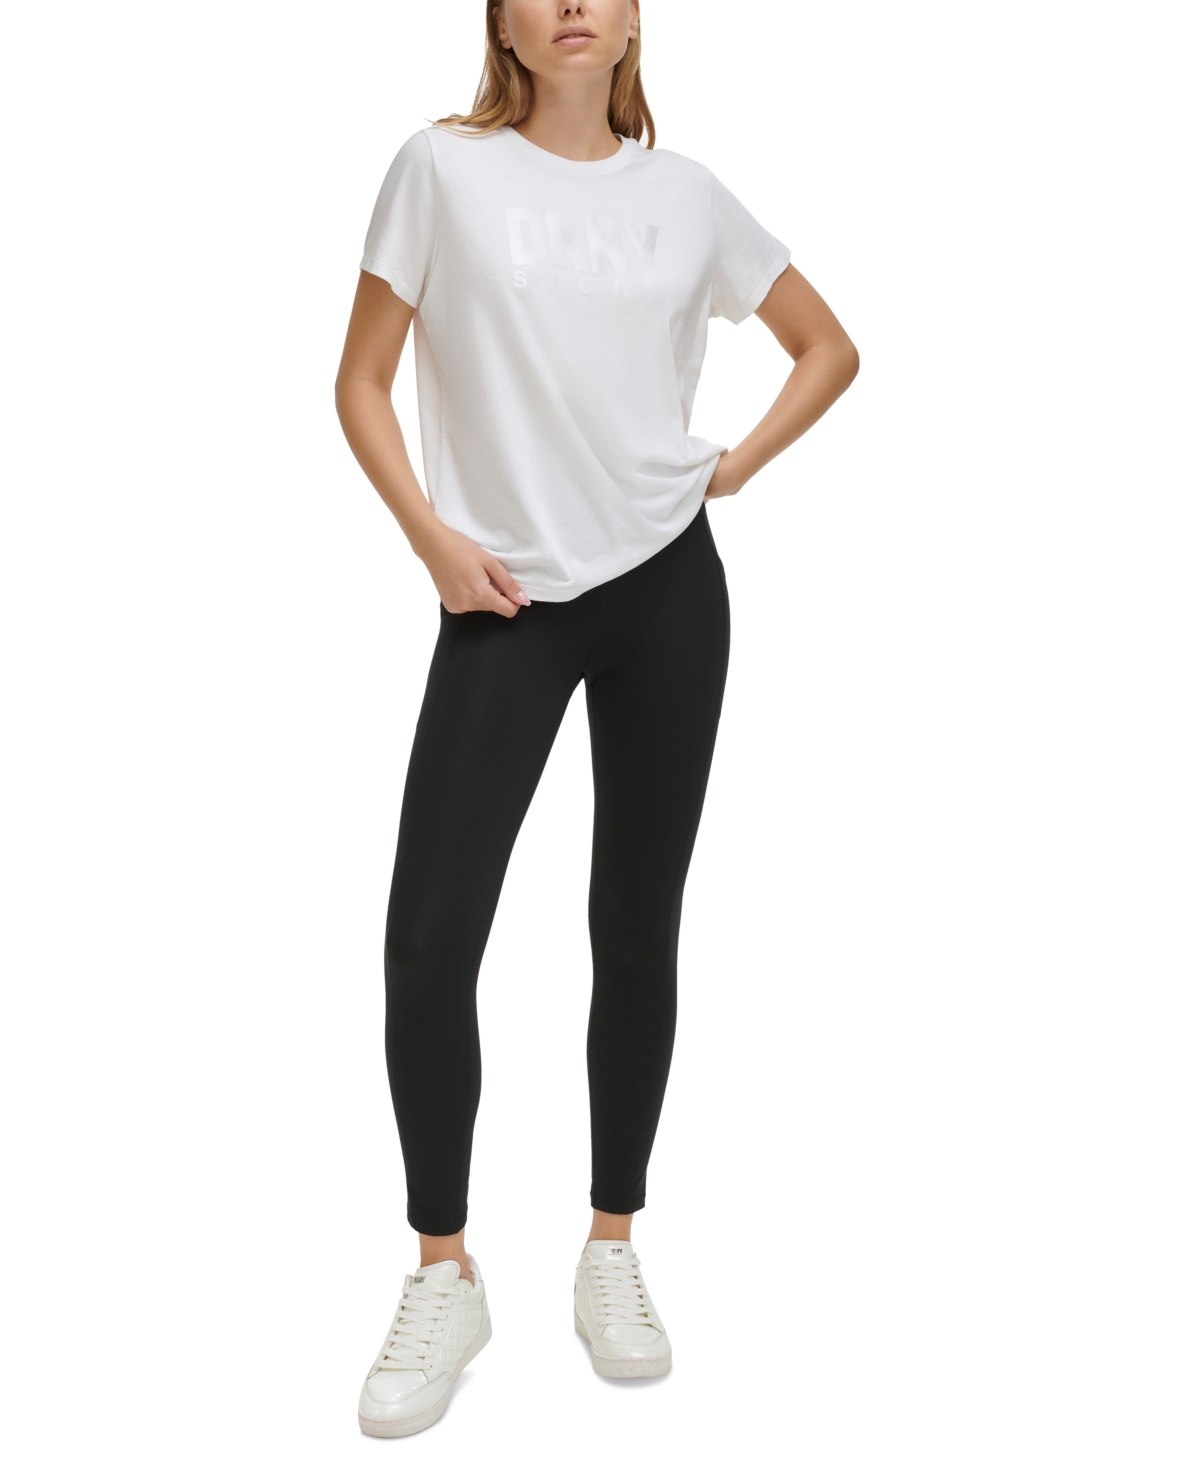 DKNY Activewear for Women